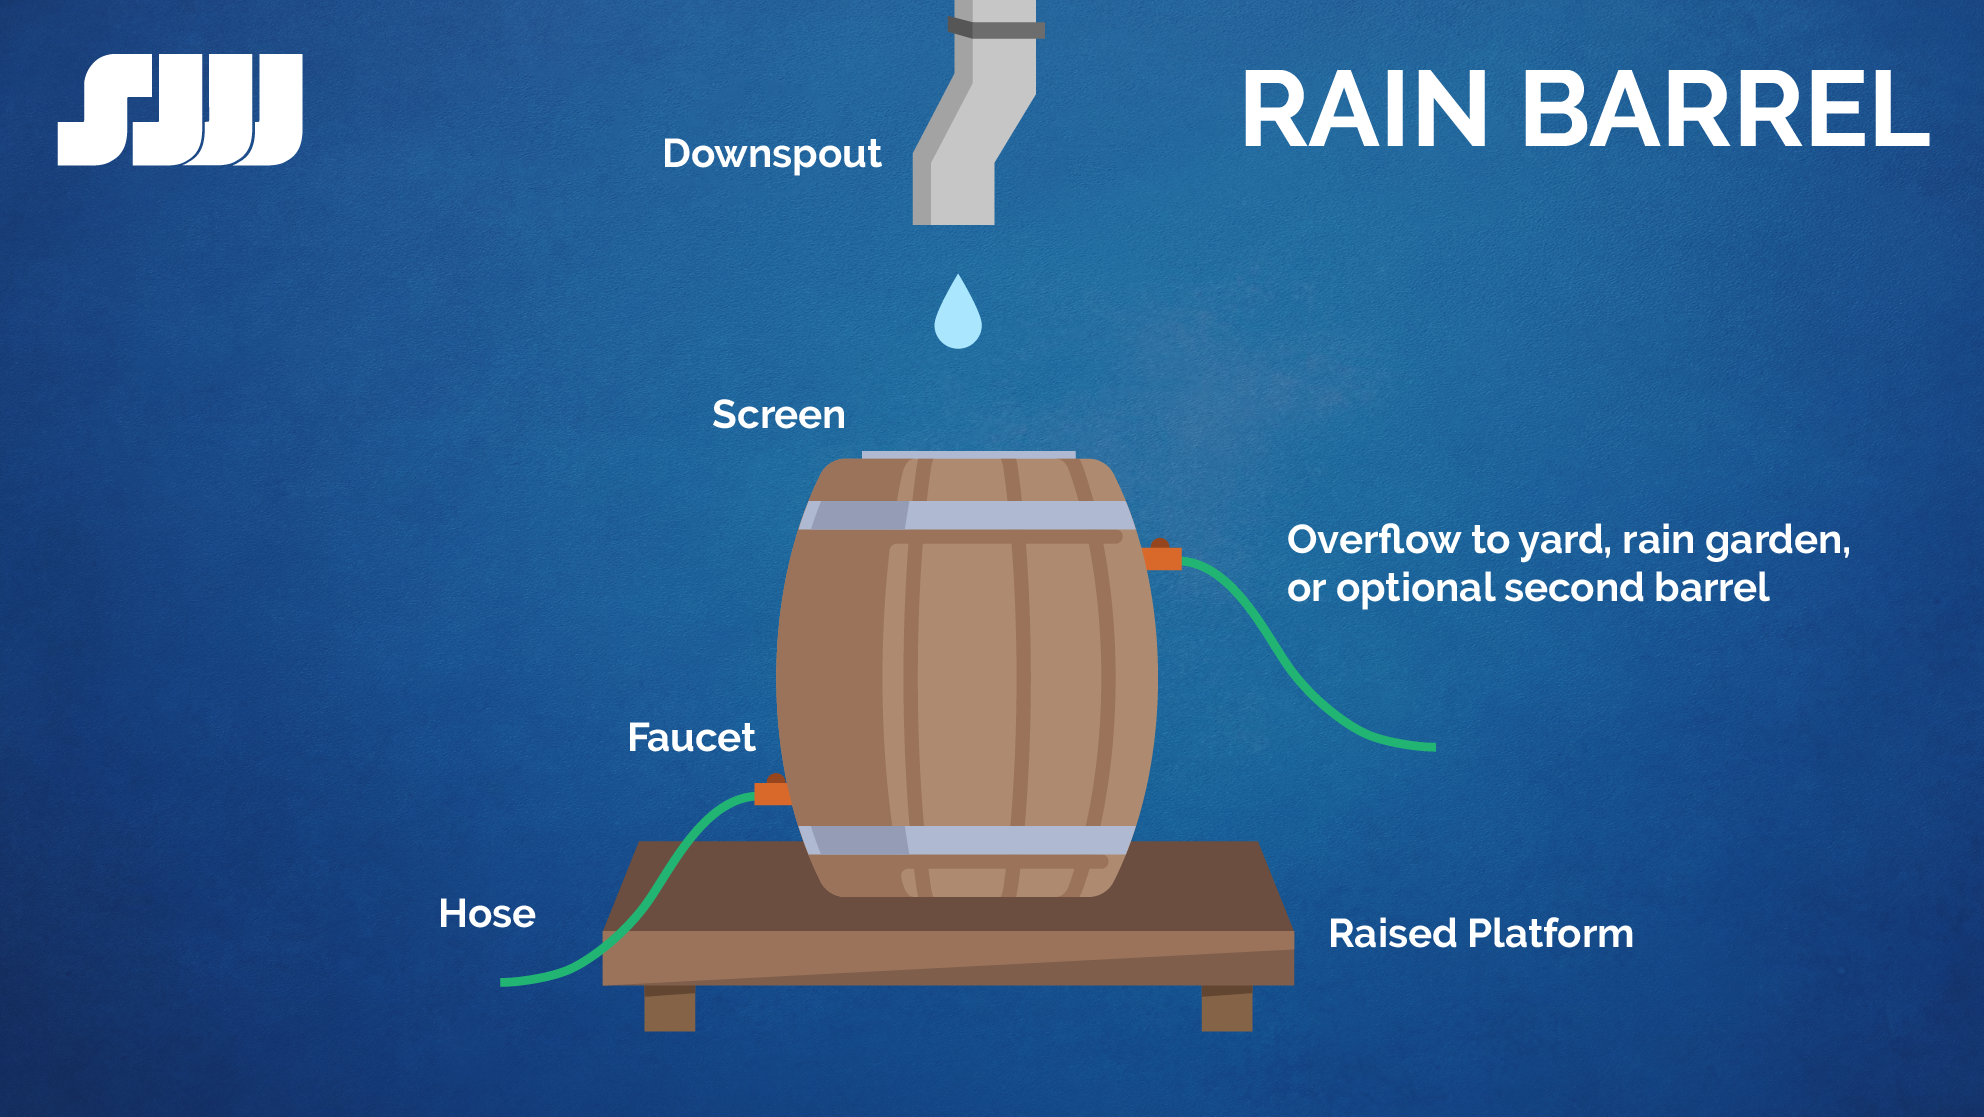 Image of rain barrel and instructions for how to create one yourself.